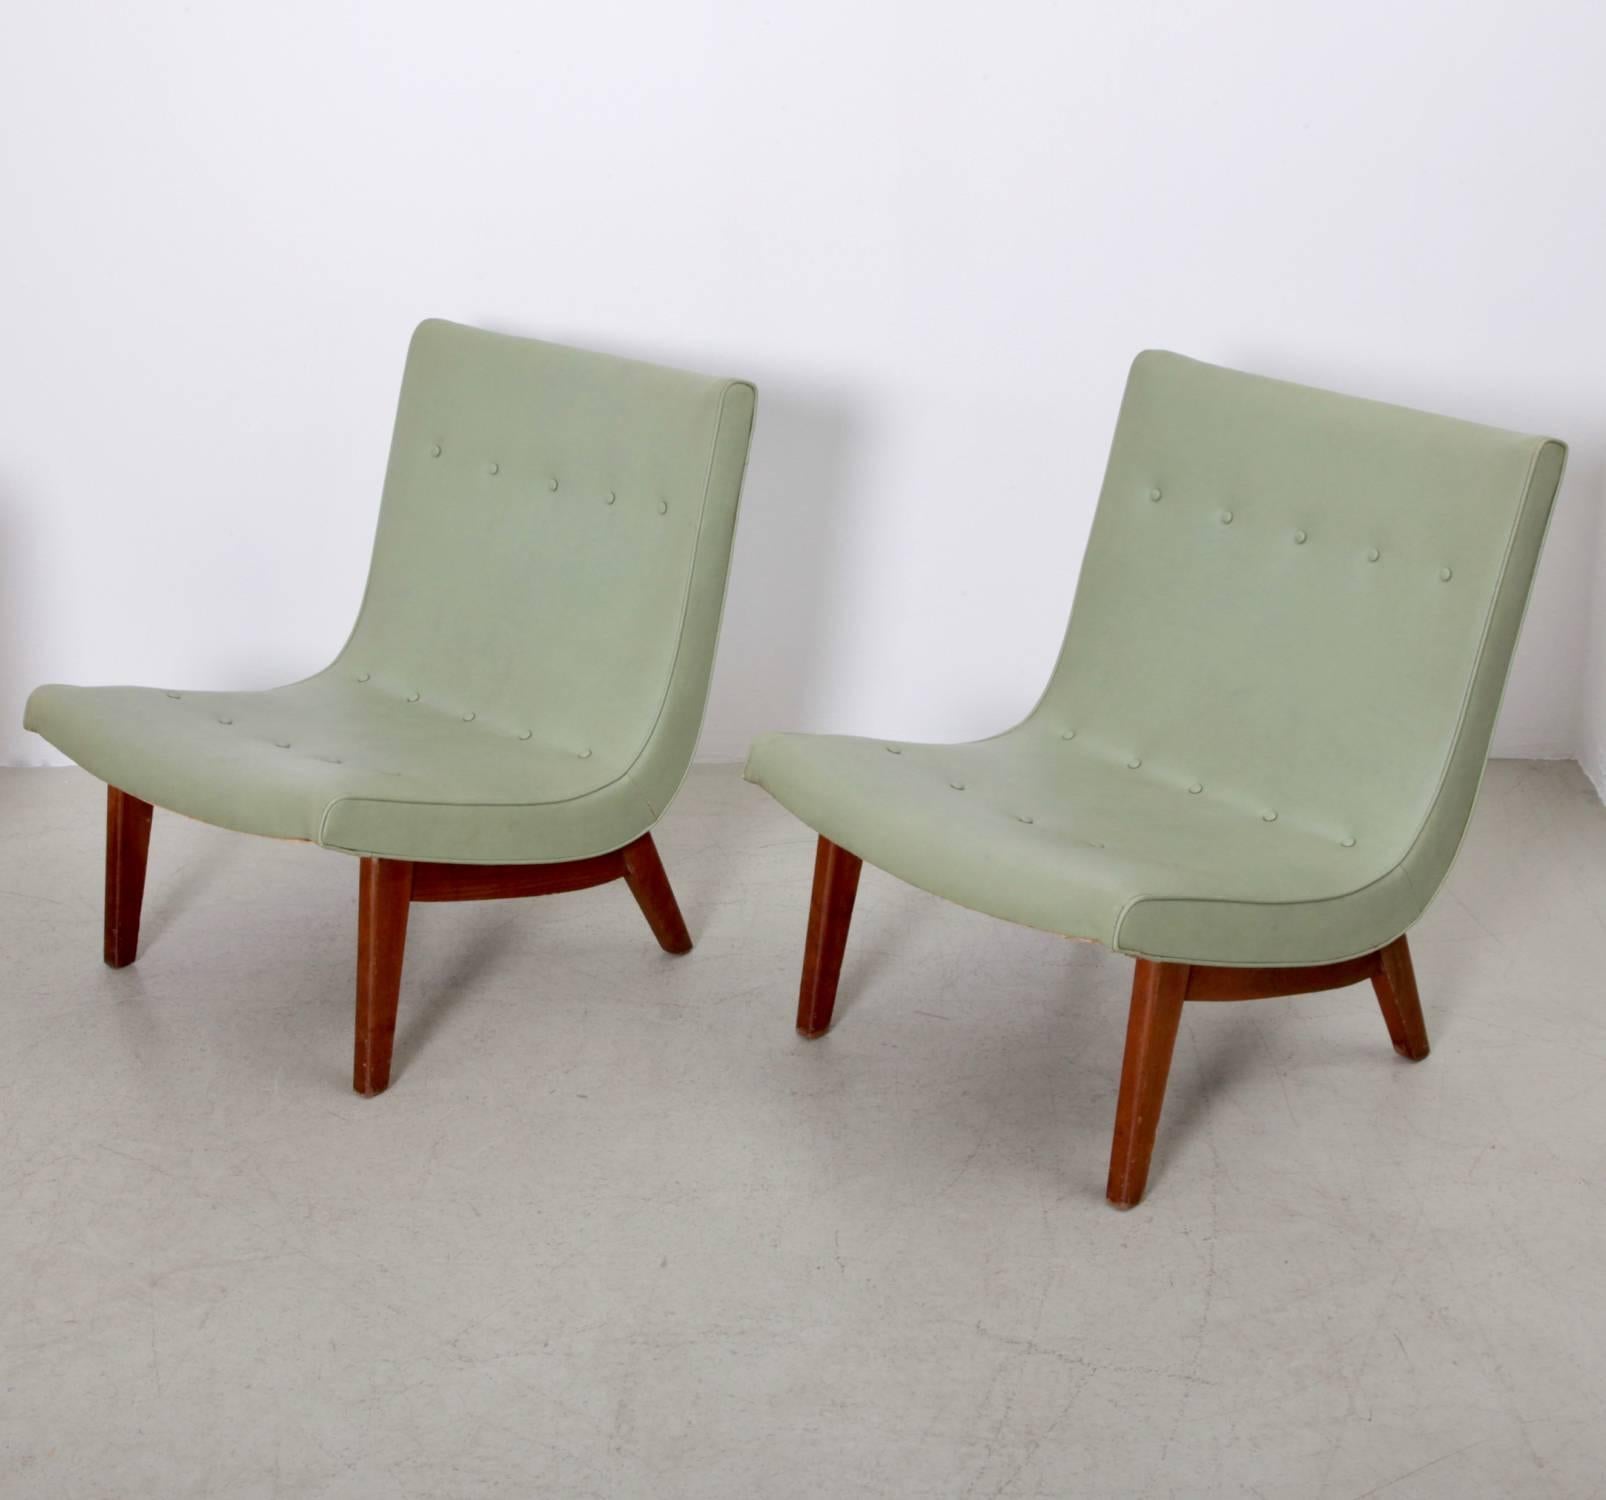 Original condition pair of Milo Baughman lounge chairs for Thayer Coggin scoop chairs. They have a solid wooden frame and the original ski leather in green.

